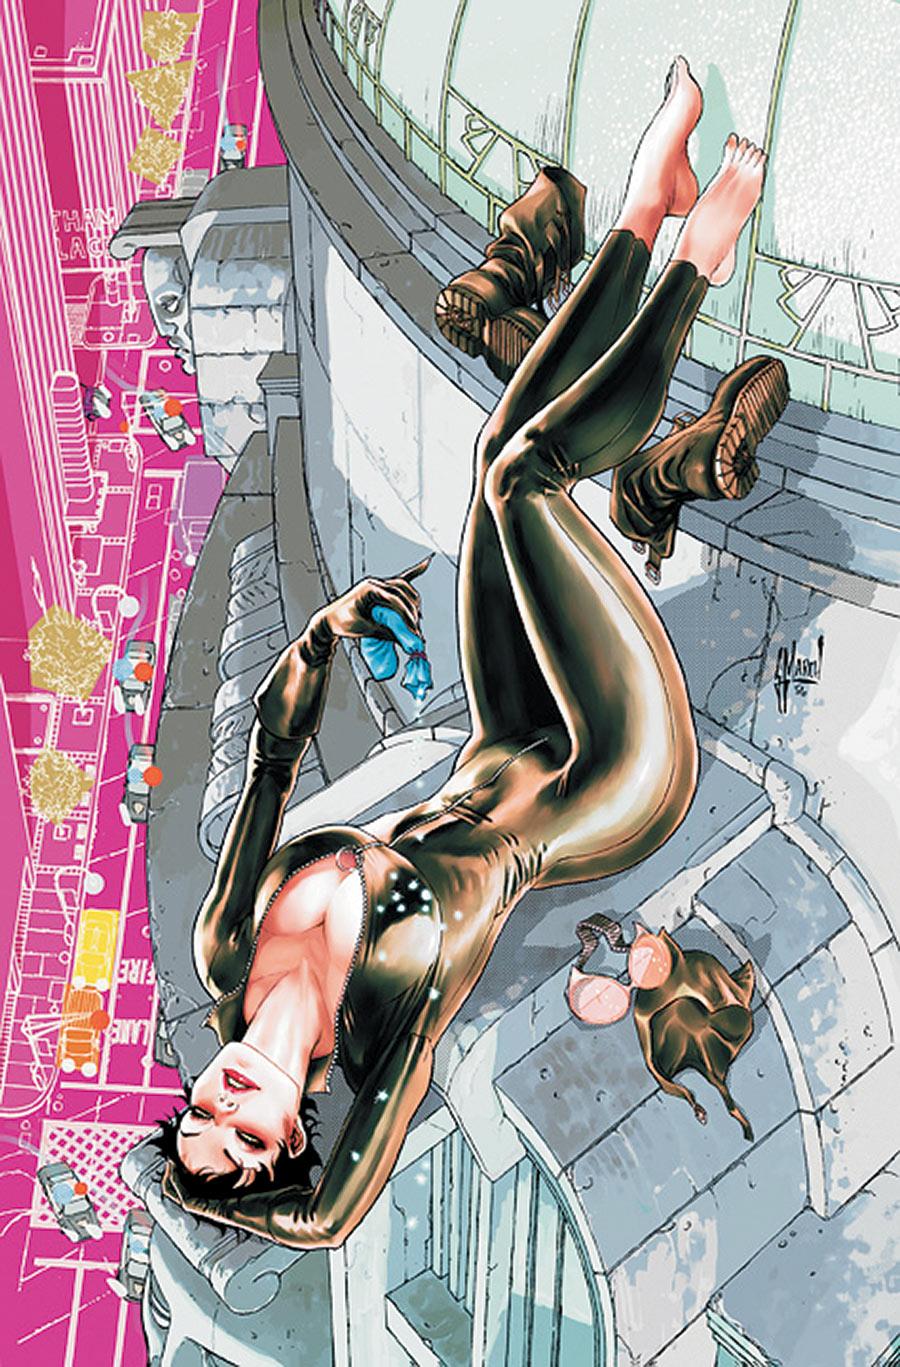 60+ Hot Pictures Of Catwoman From DC Comics 9